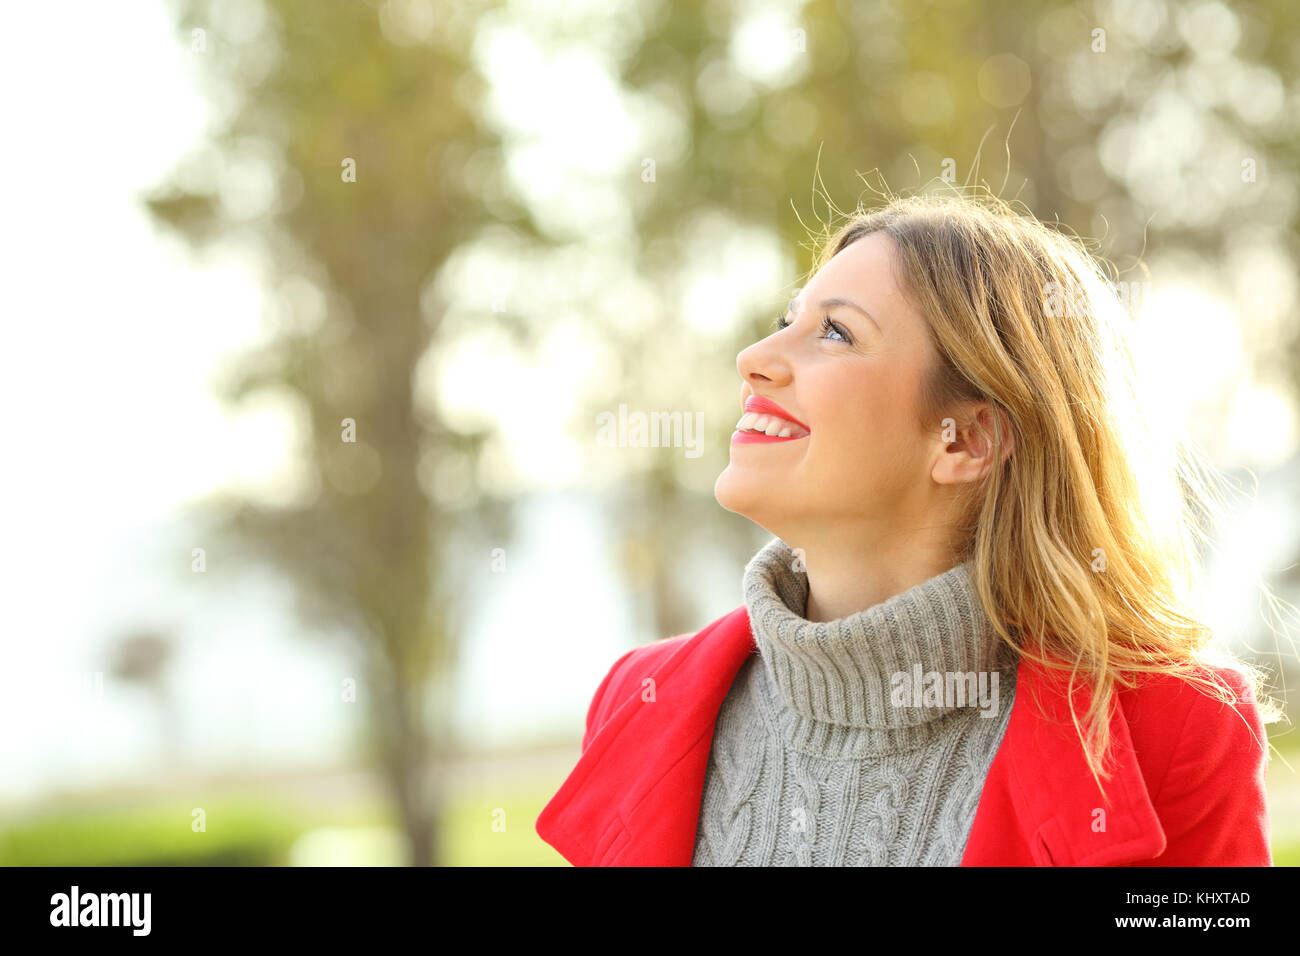 Profile of a happy fashion woman wearing a red jacket looking above in winter Stock Photo